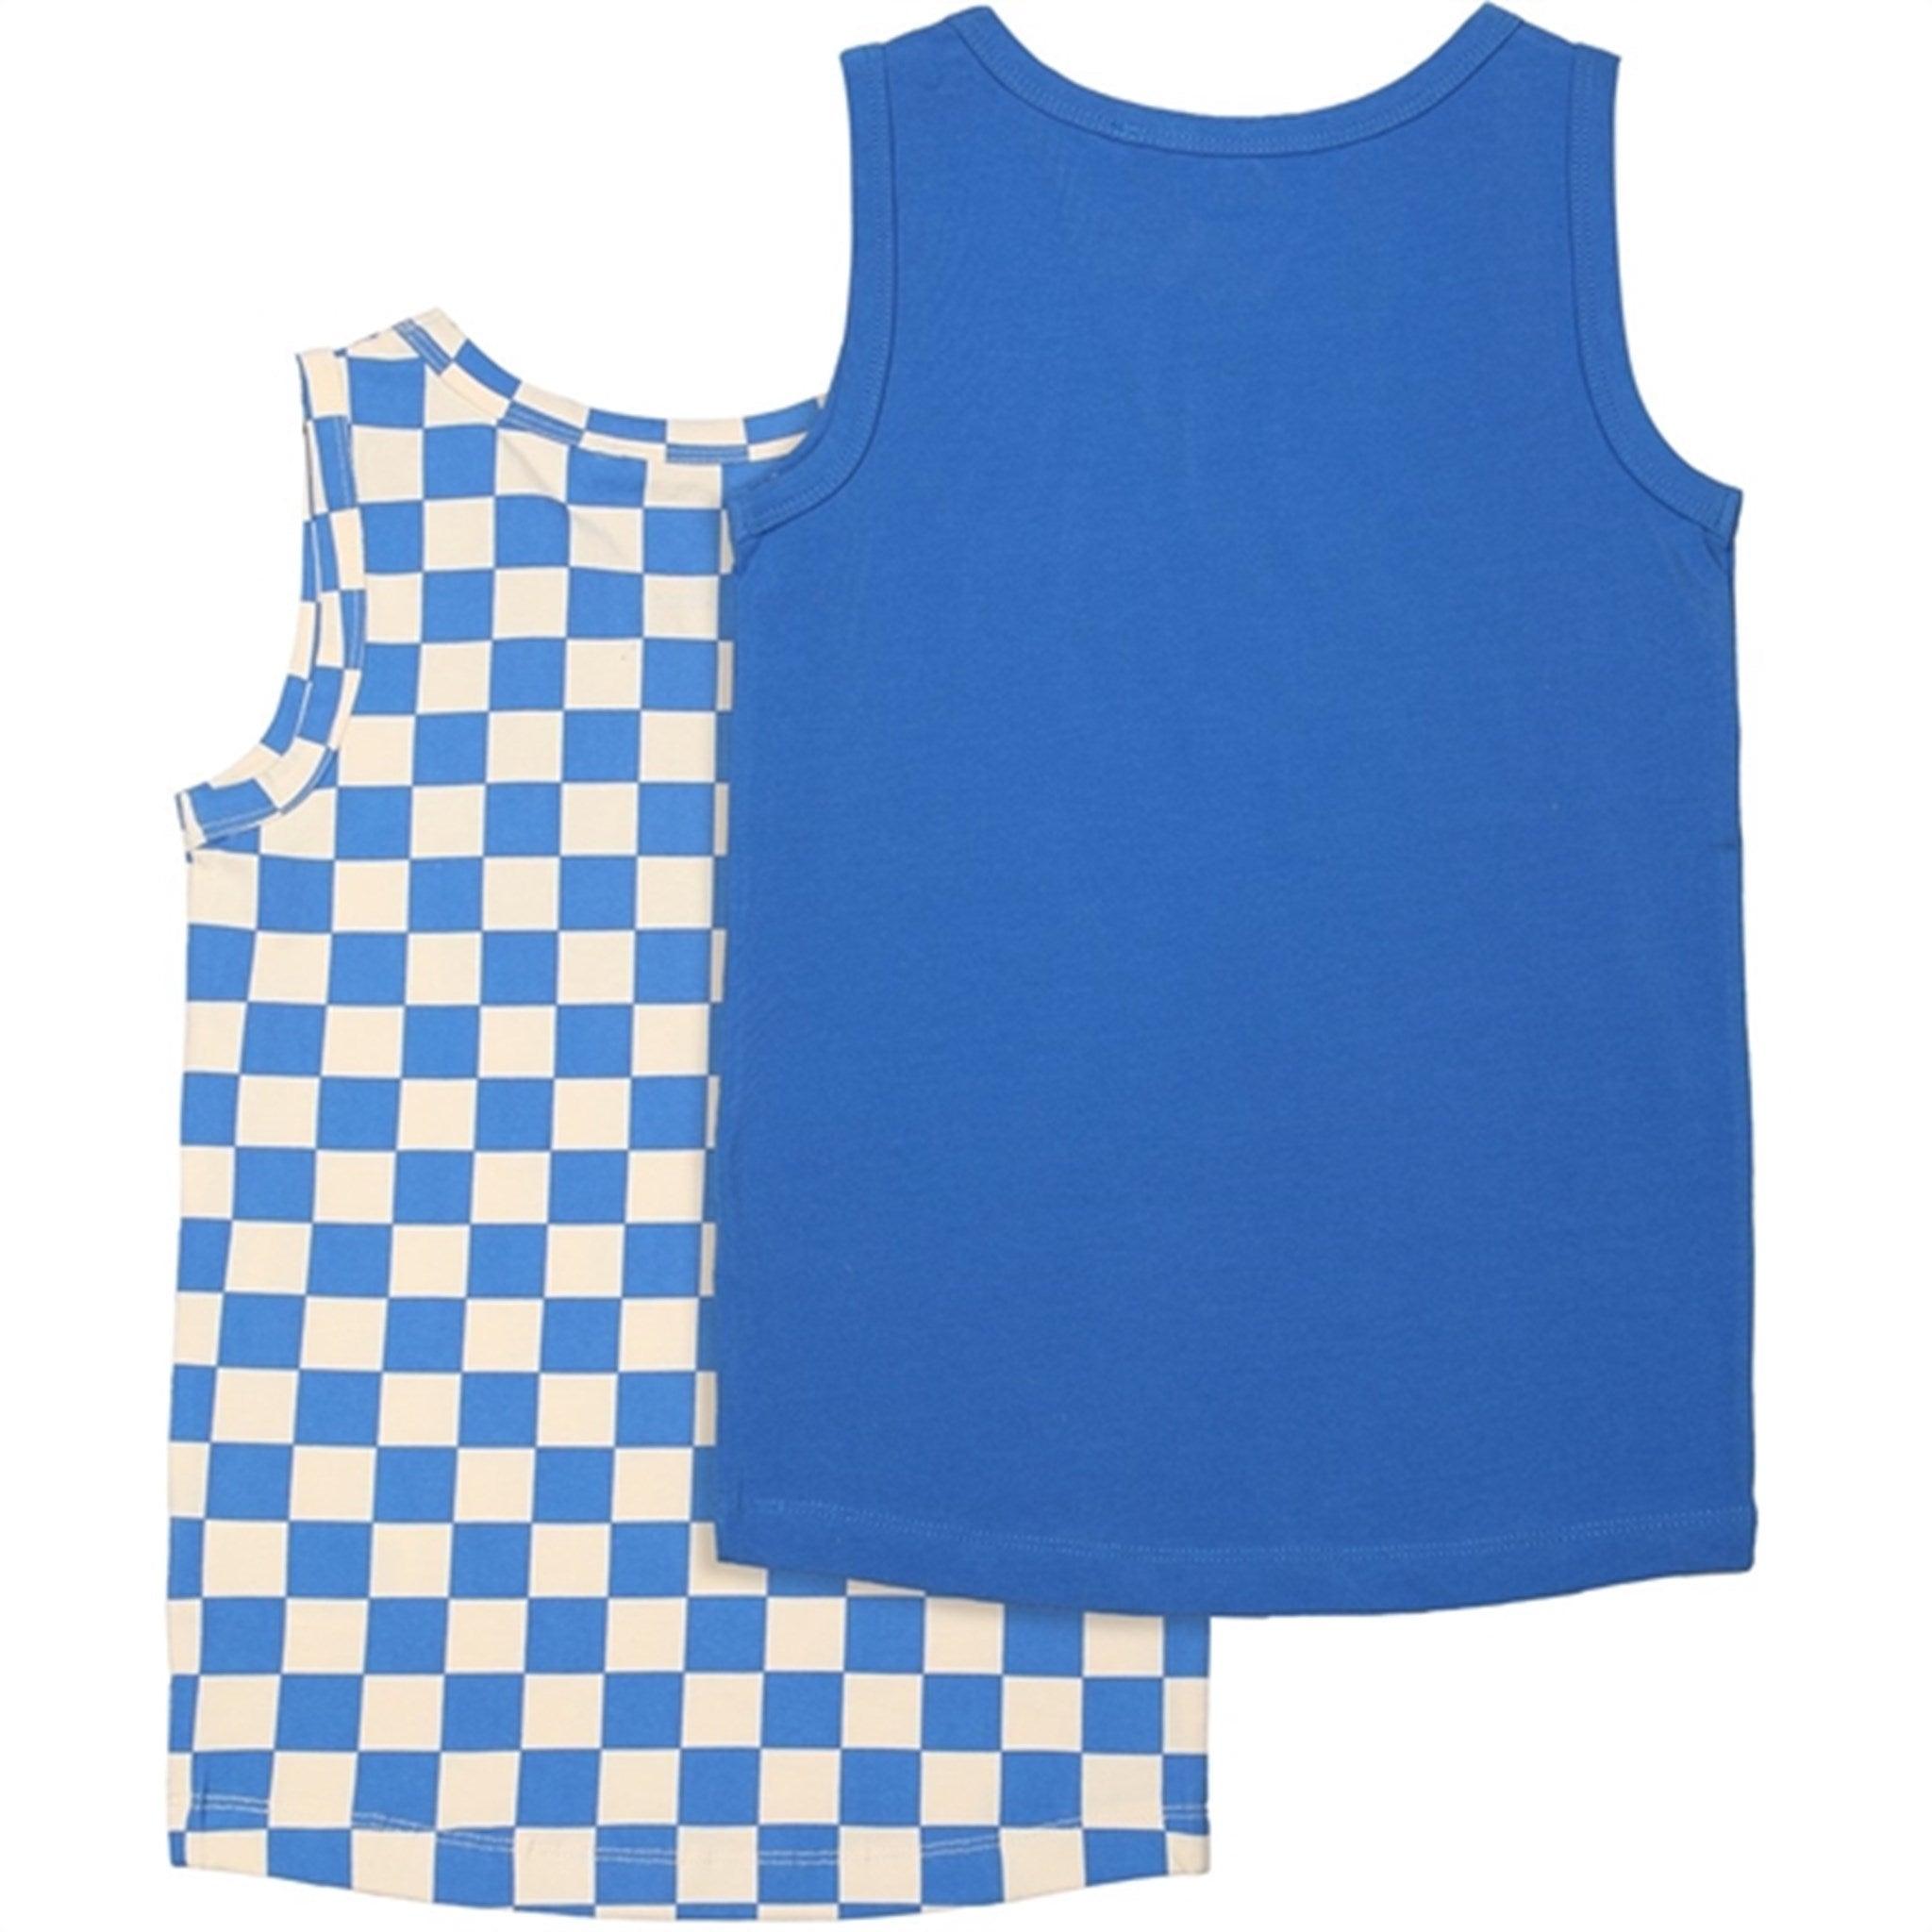 The New Strong Blue Tank Top 2-Pak 2